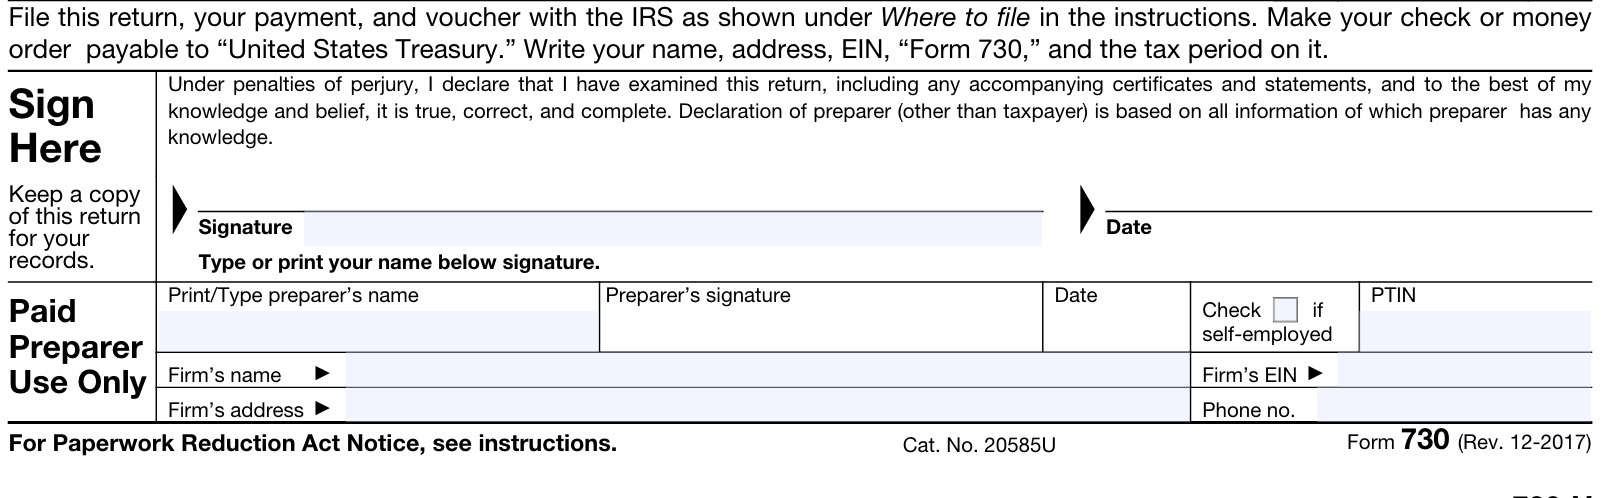 irs form 730, taxpayer signature